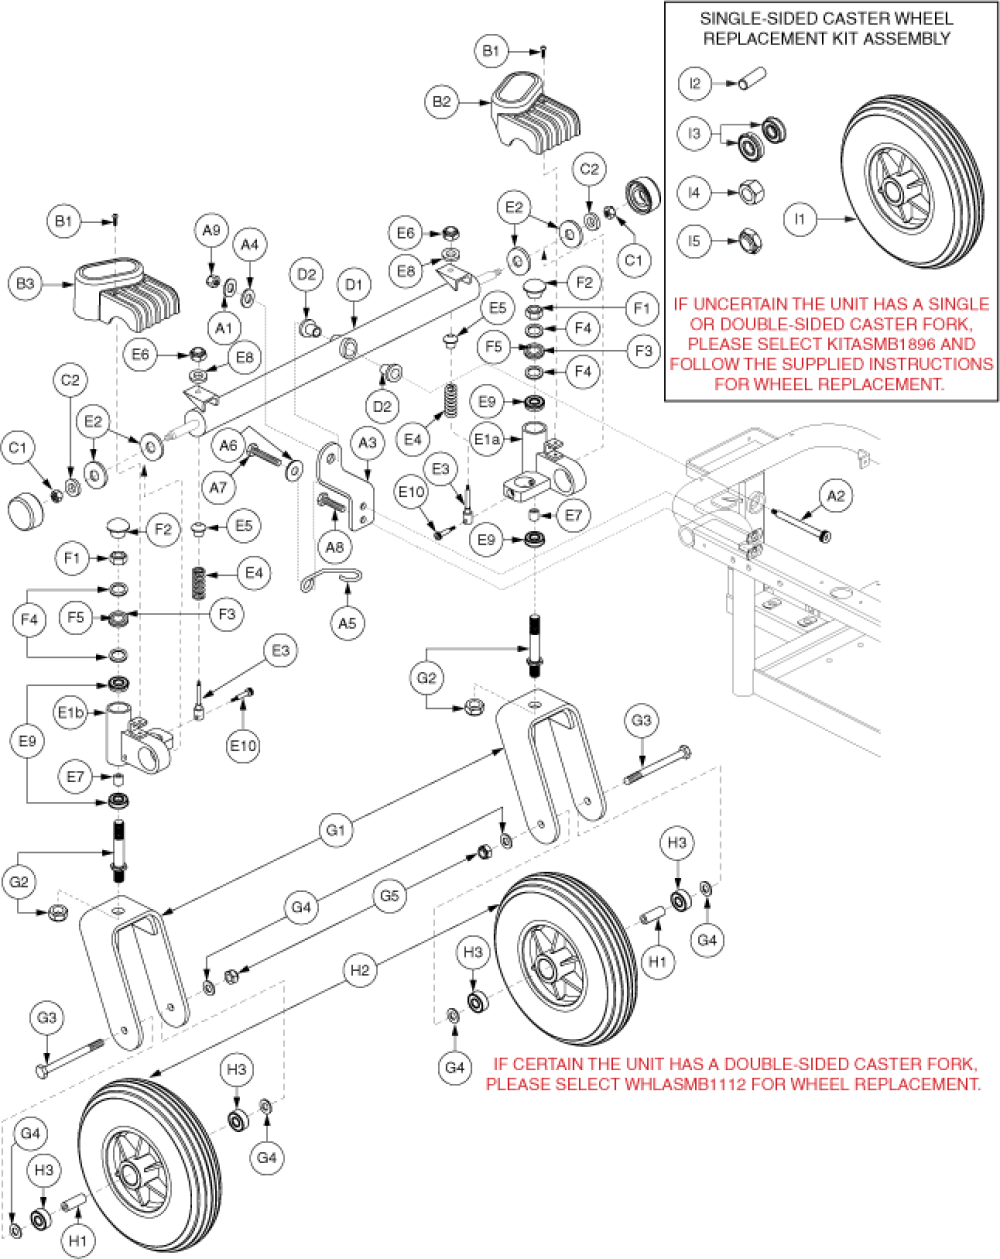 Articulating Beam Assembly, Gen. 5 parts diagram